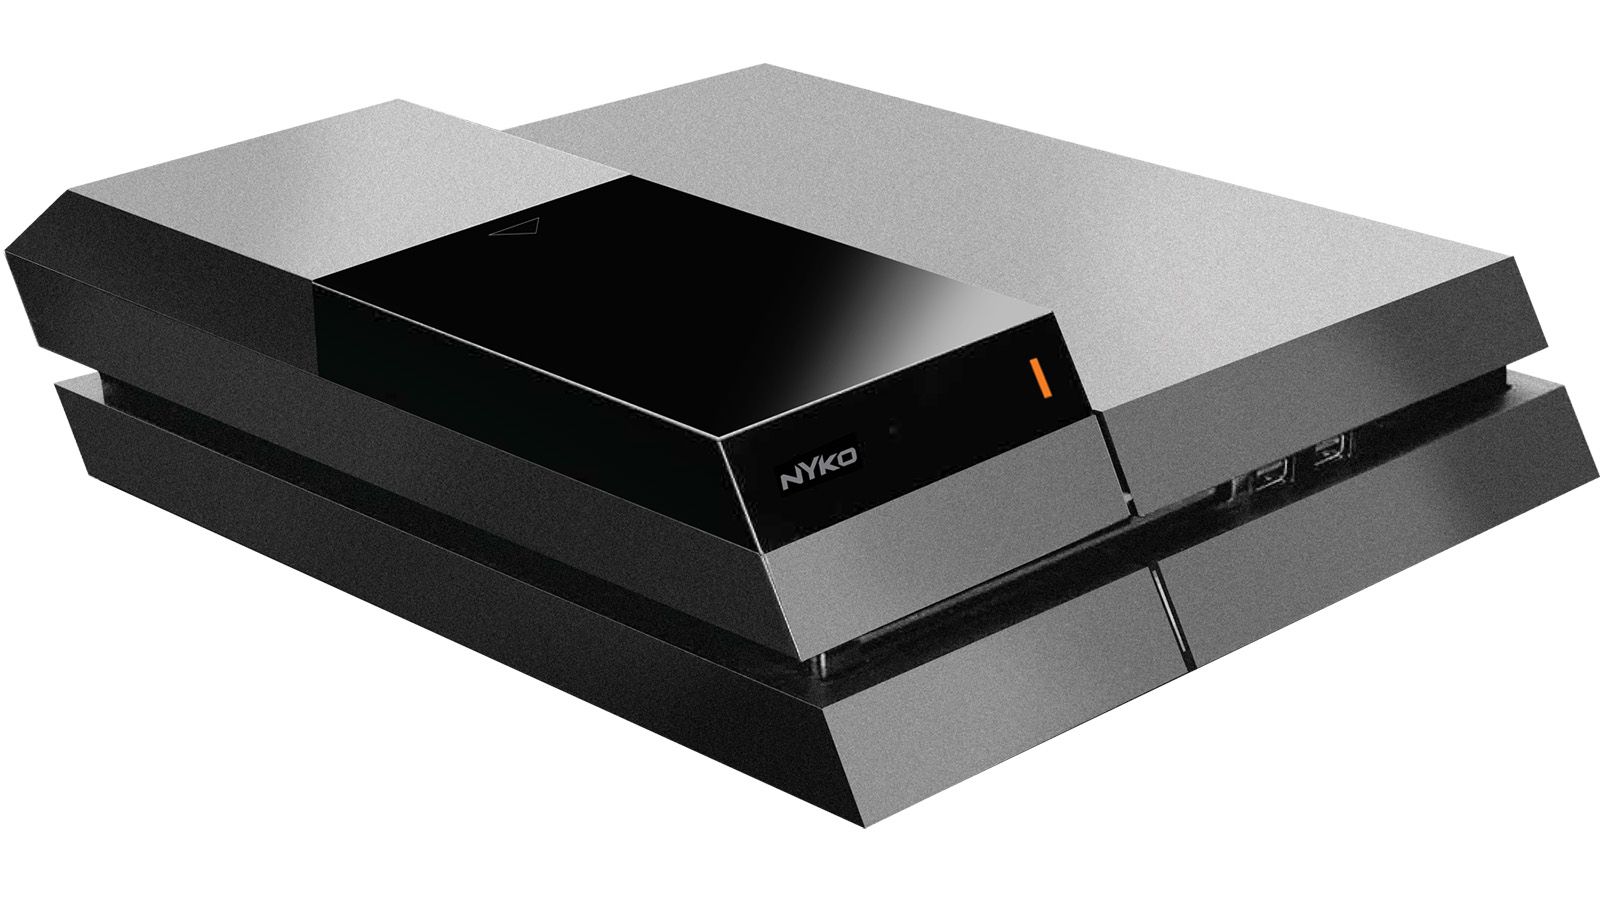 nyko ps4 data bank lets you swap out the hard drive for cheaper larger 3 5 inch drives image 1